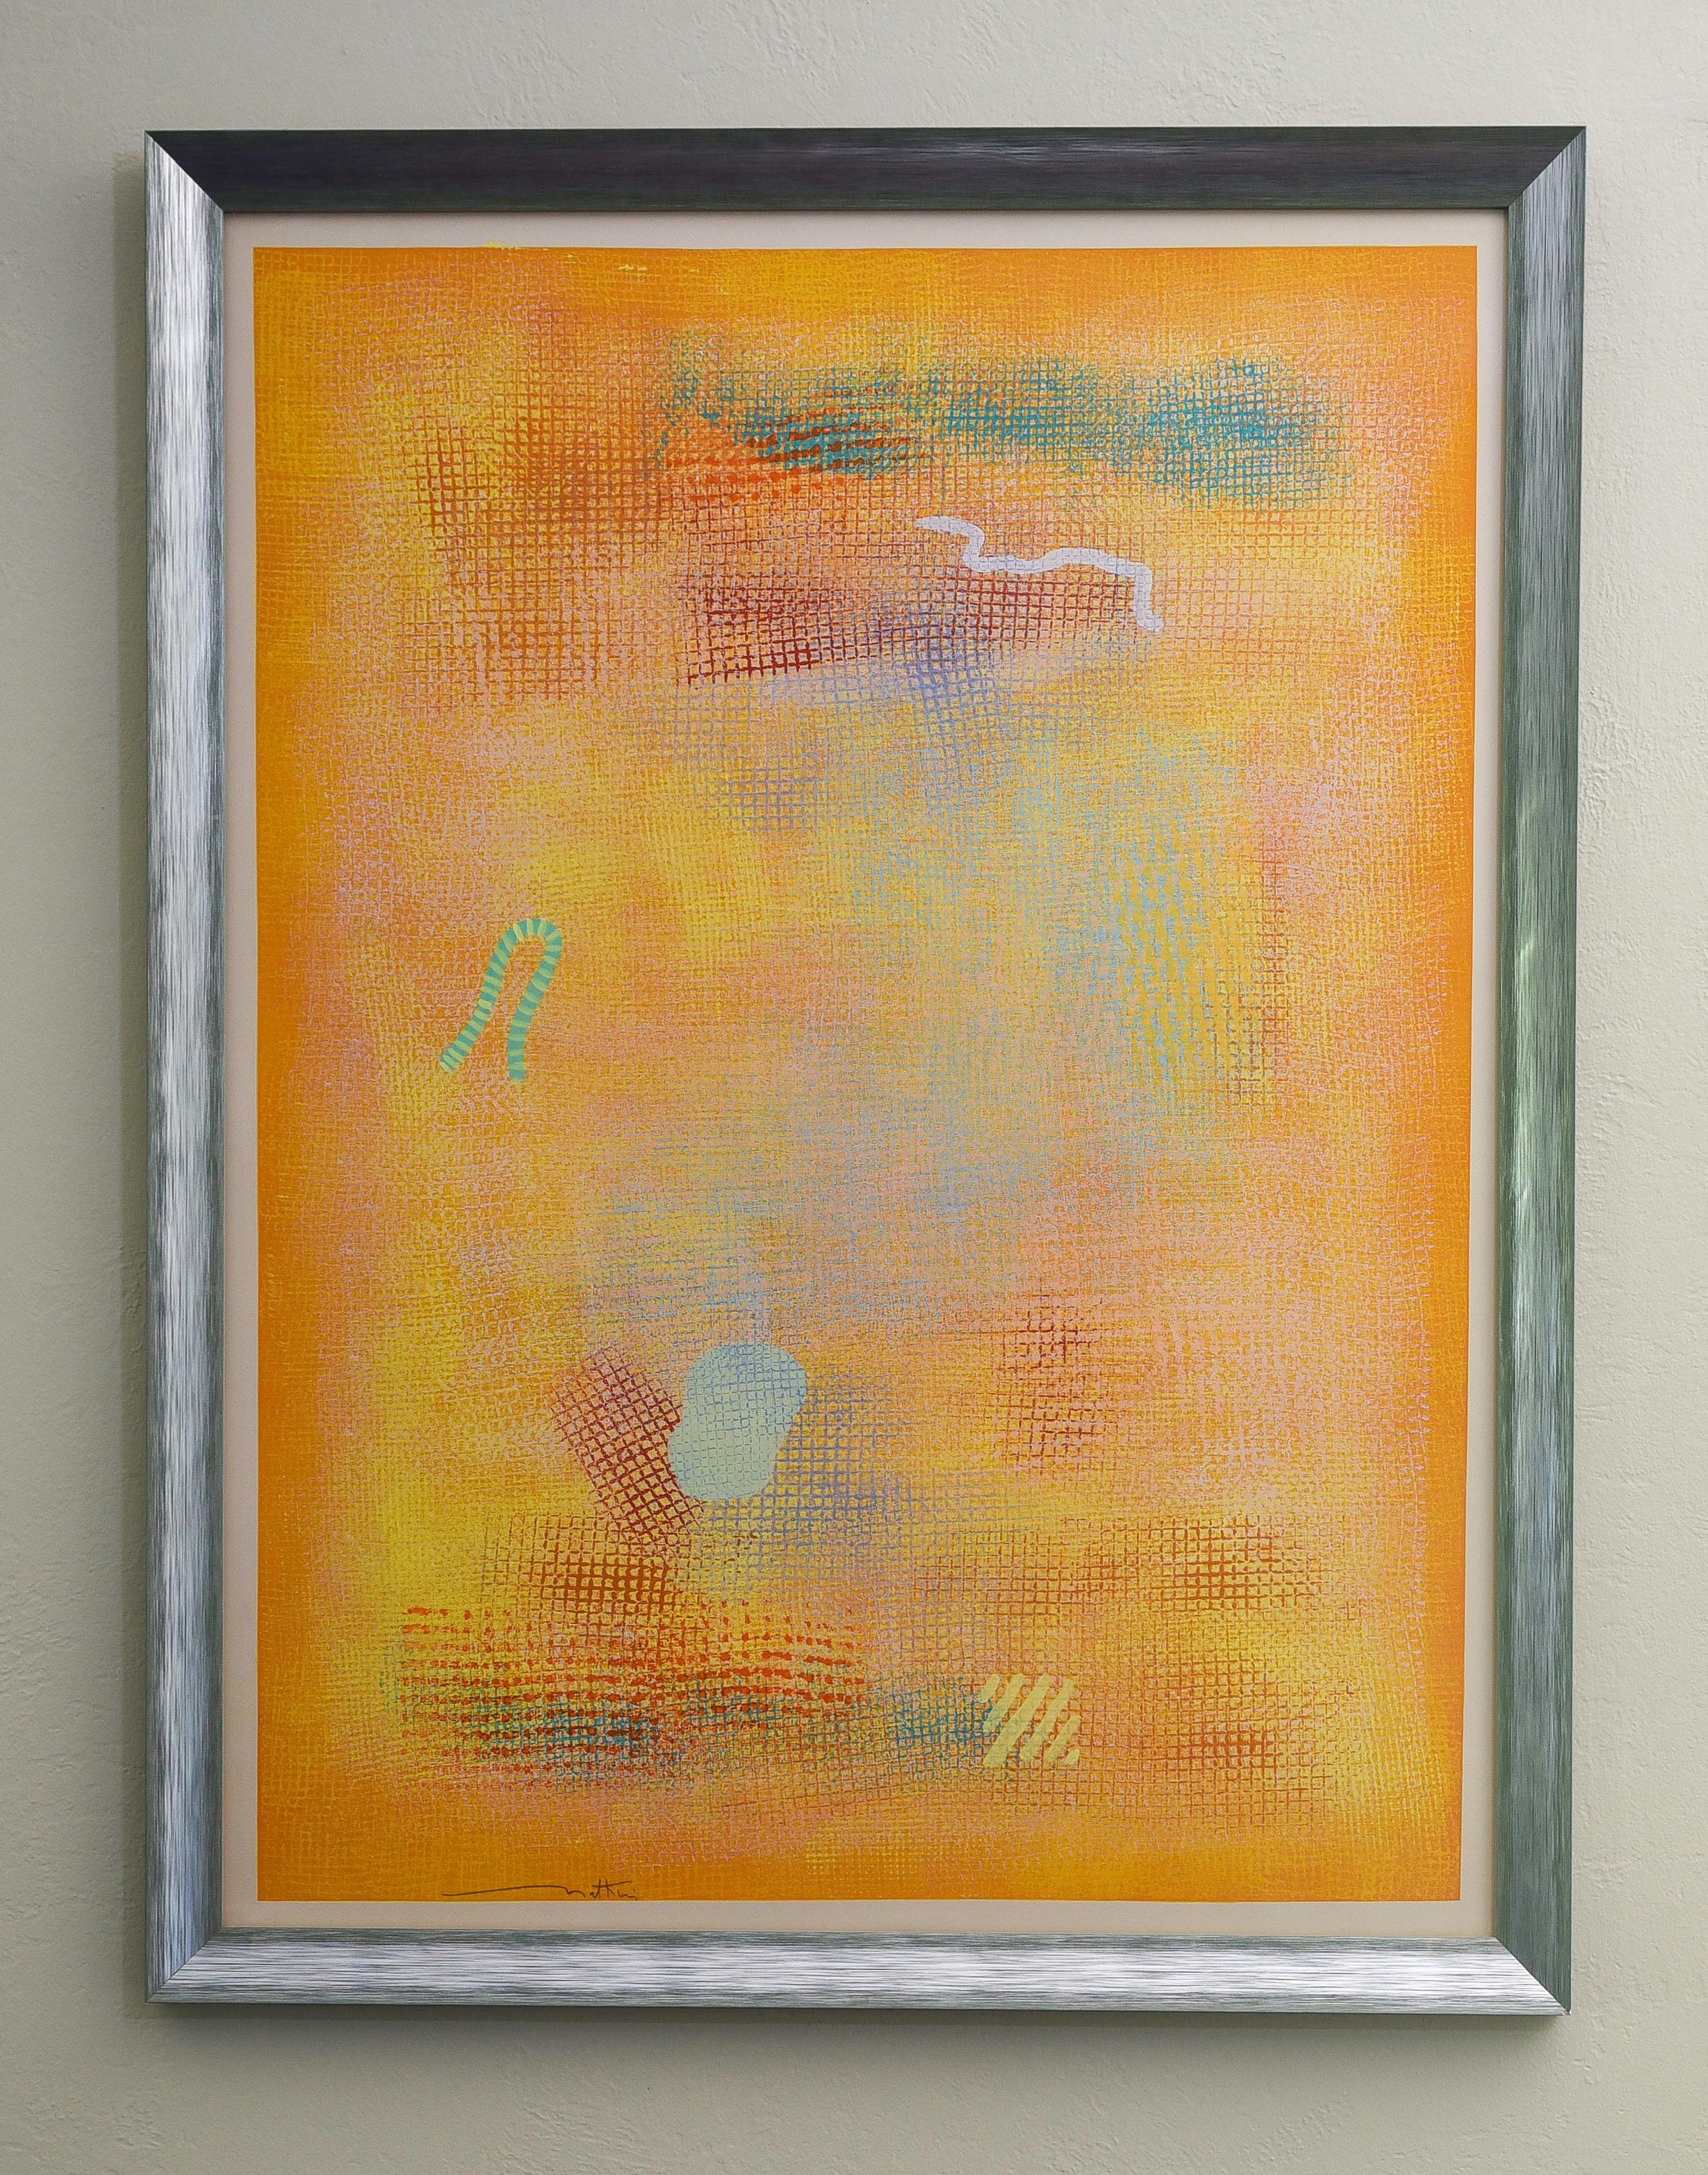 
Robert Natkin Original Painting 1970's-Superb Example of its type.  There were a number of works done in this style in the 1970s (this one is signed but not dated). The color palette, with its vivid yellow ground combined with A host of other